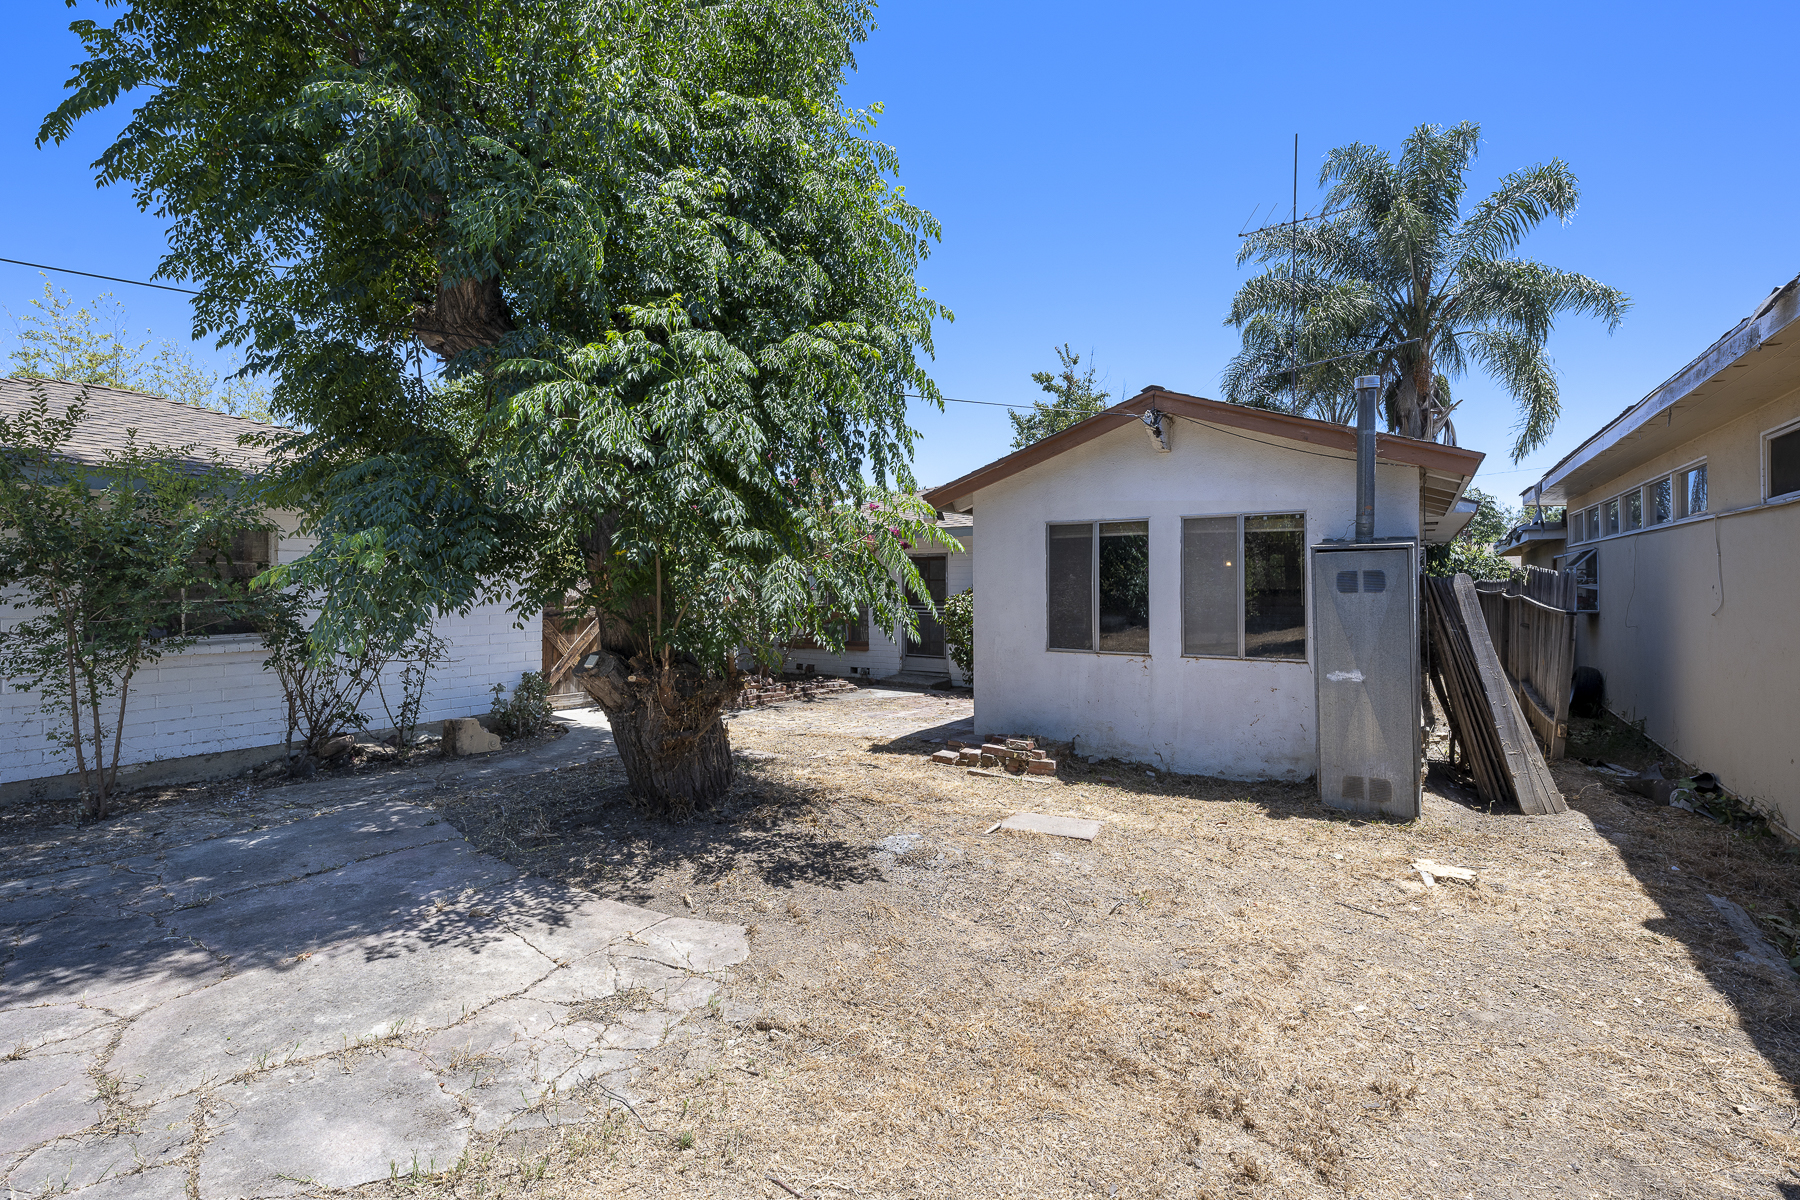 319 E. Francis Ave, La Habra, CA 90631: Exterior shot of backyard shed space and back of house.